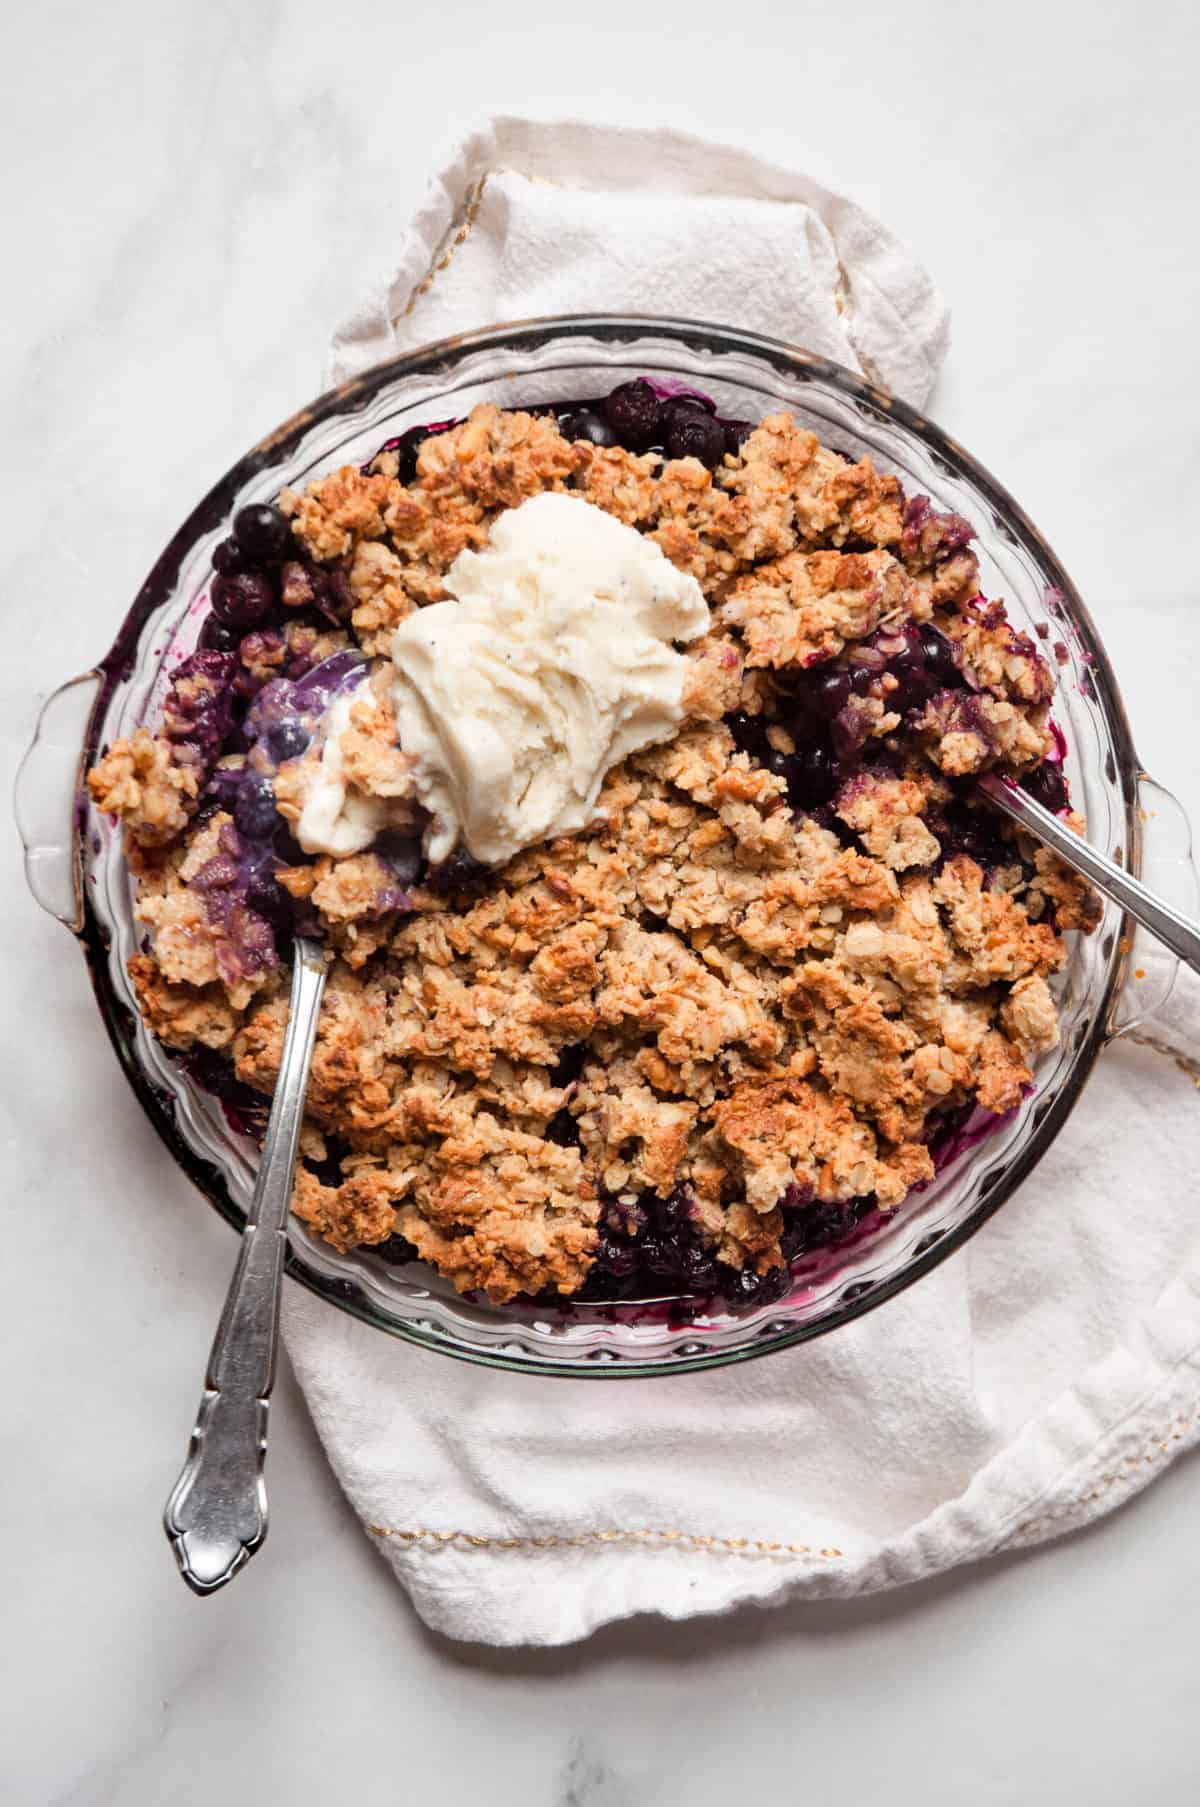 Blackberry Crumble Recipe: A Delicious and Healthy Dessert Option